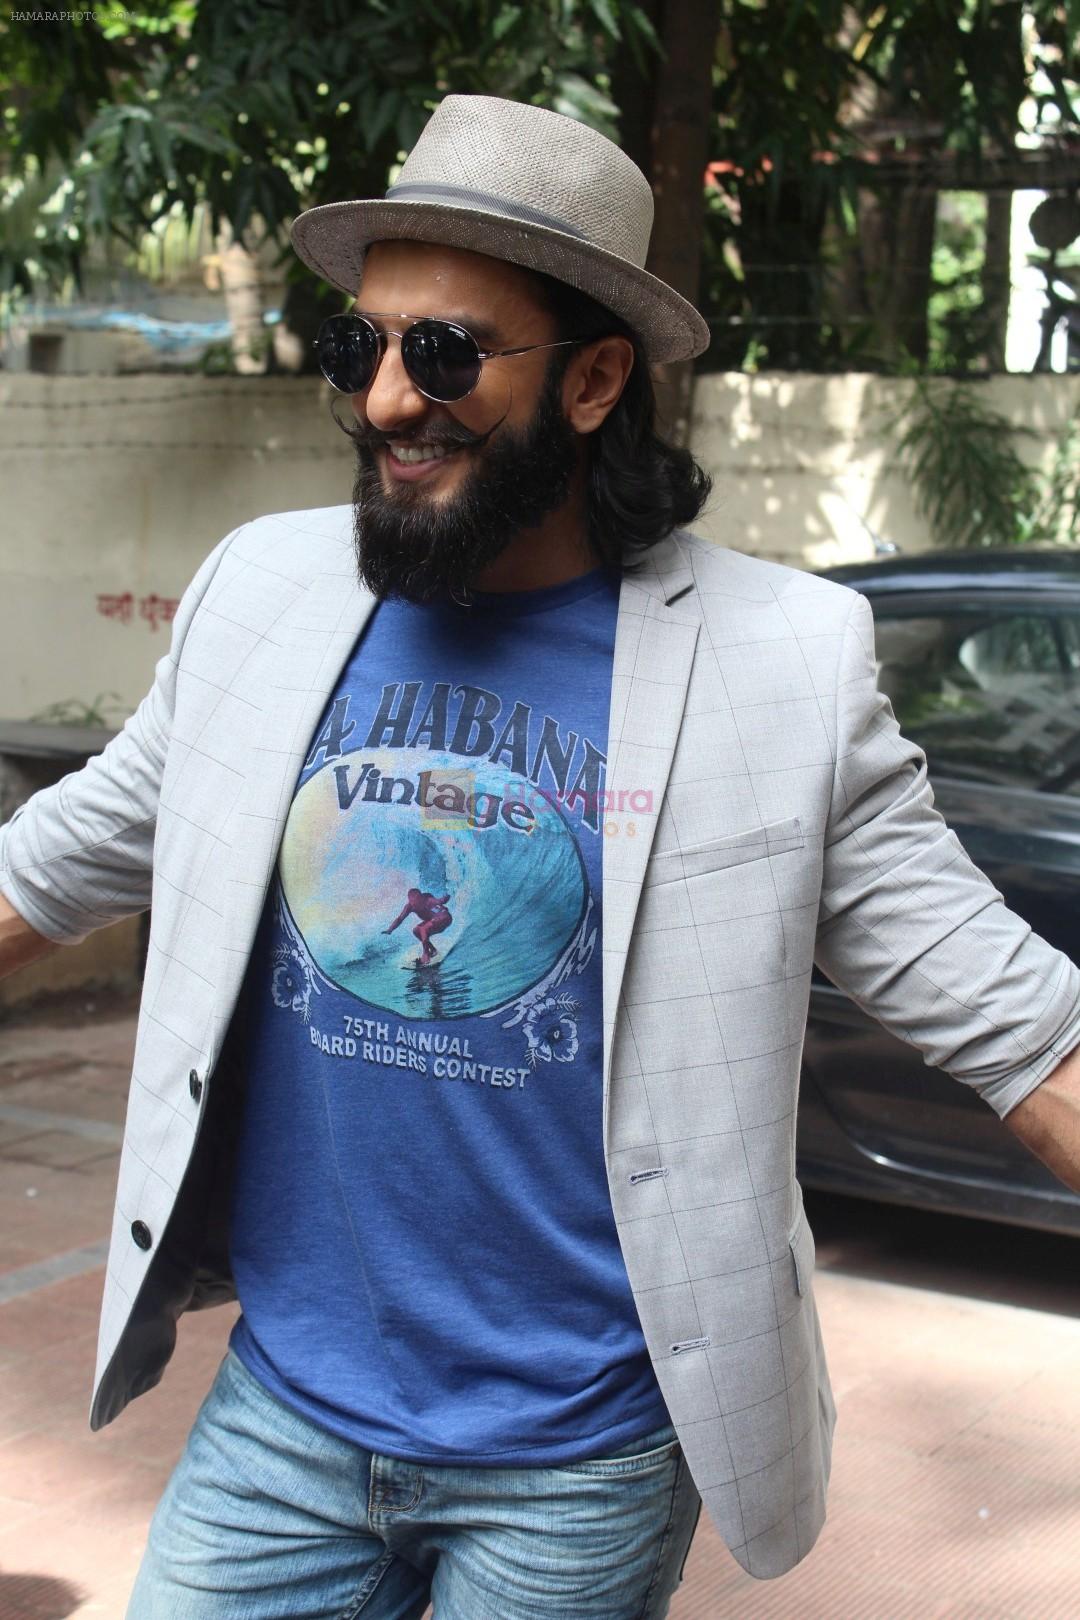 Ranveer Singh Spotted before The Recording Of their Episode NoFilterNeha Season 2 on 10th July 2017